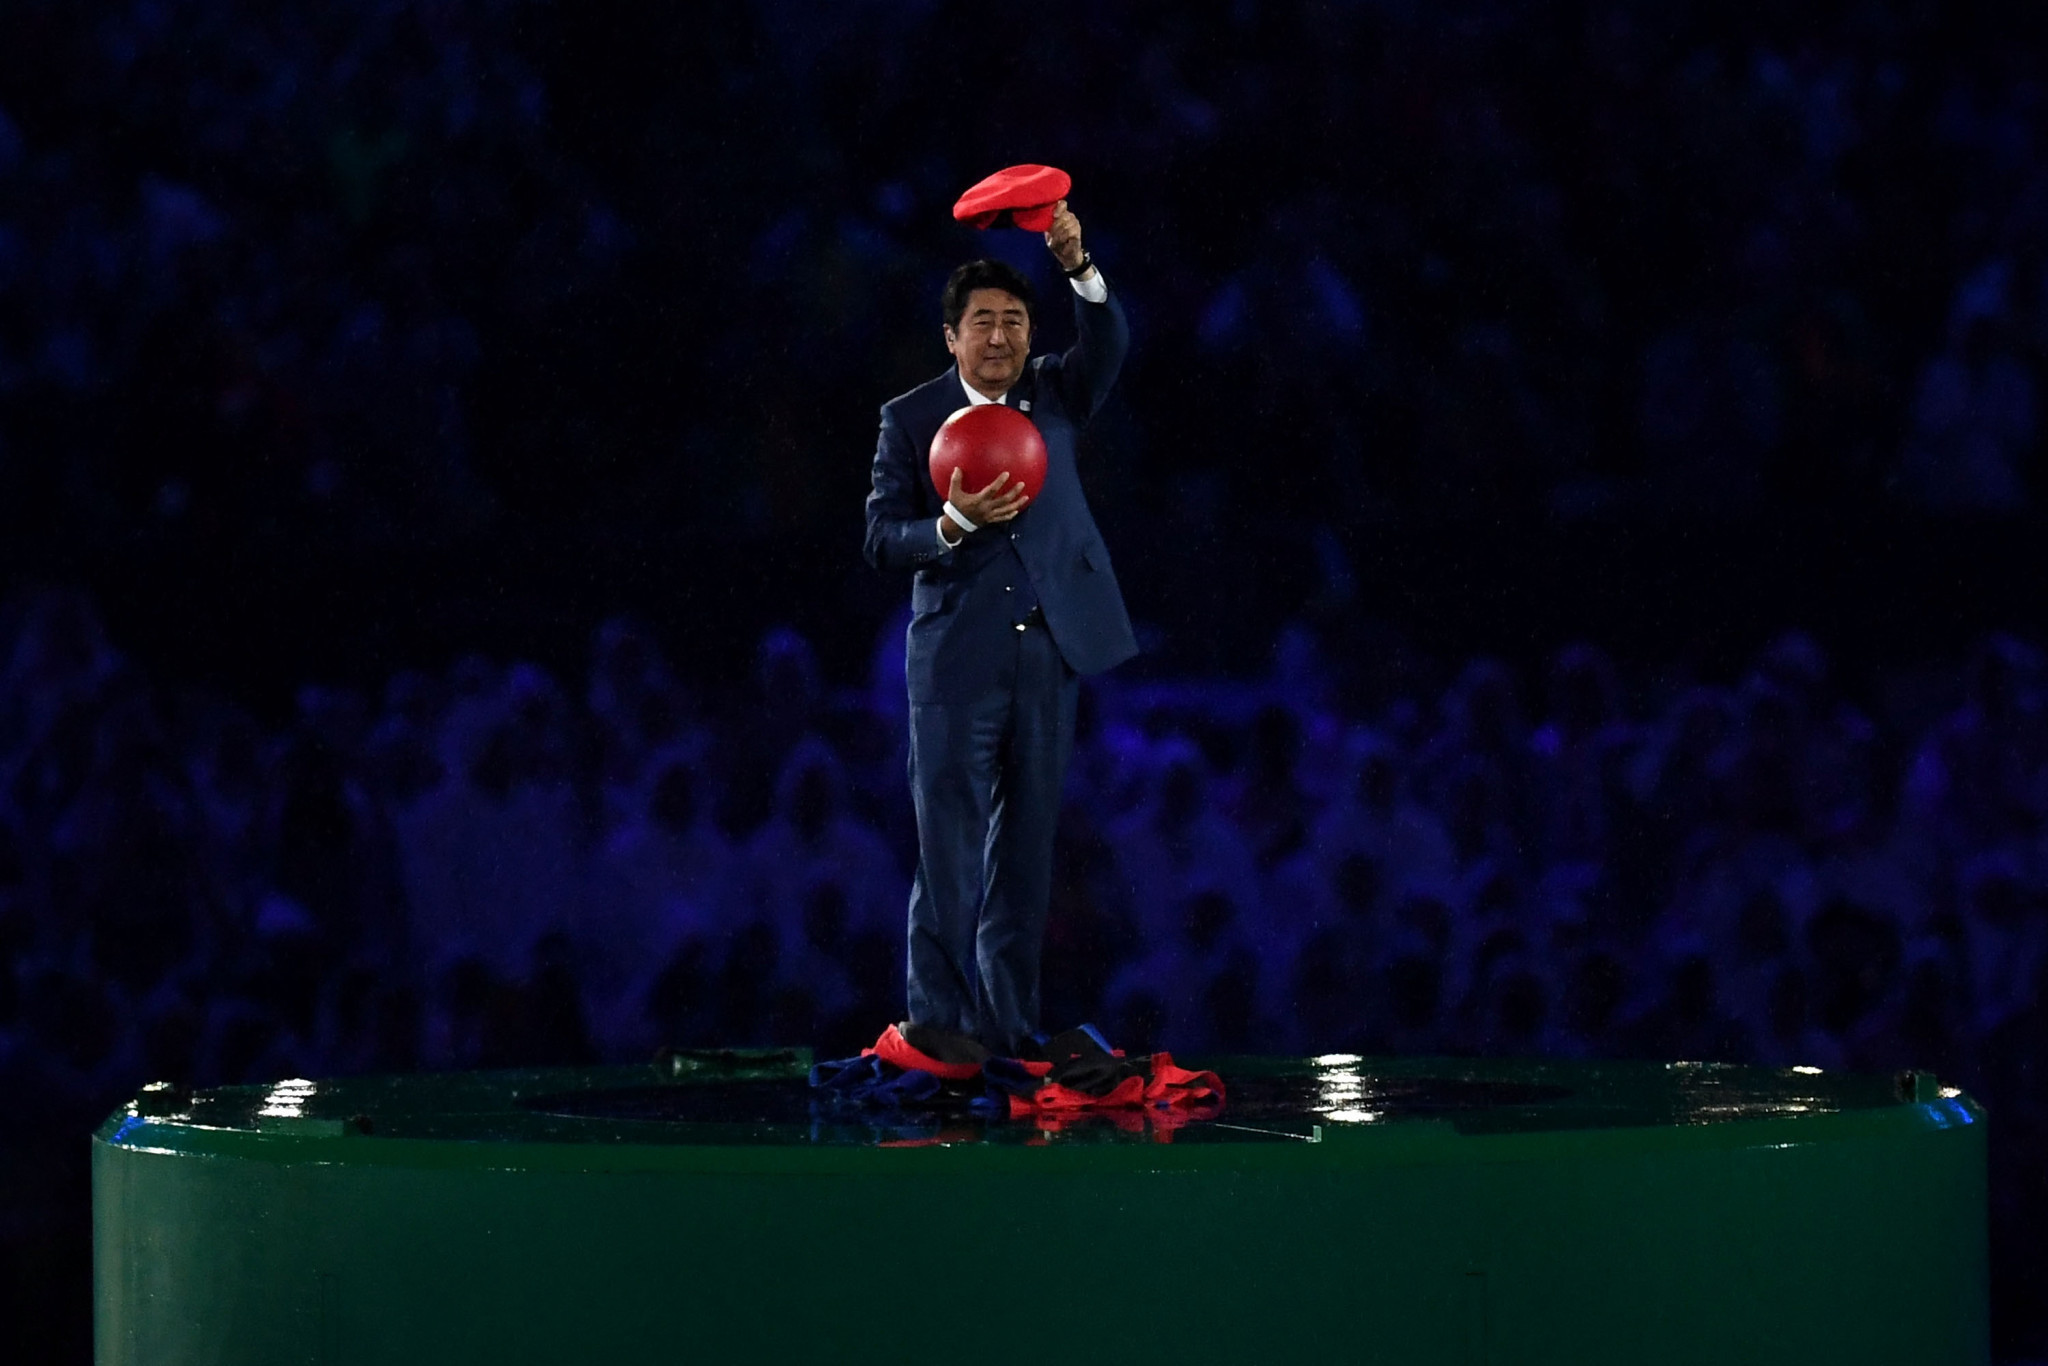 Shinzō Abe was memorably disguised as Nintendo character Mario at the Rio 2016 Closing Ceremony ©Getty Images